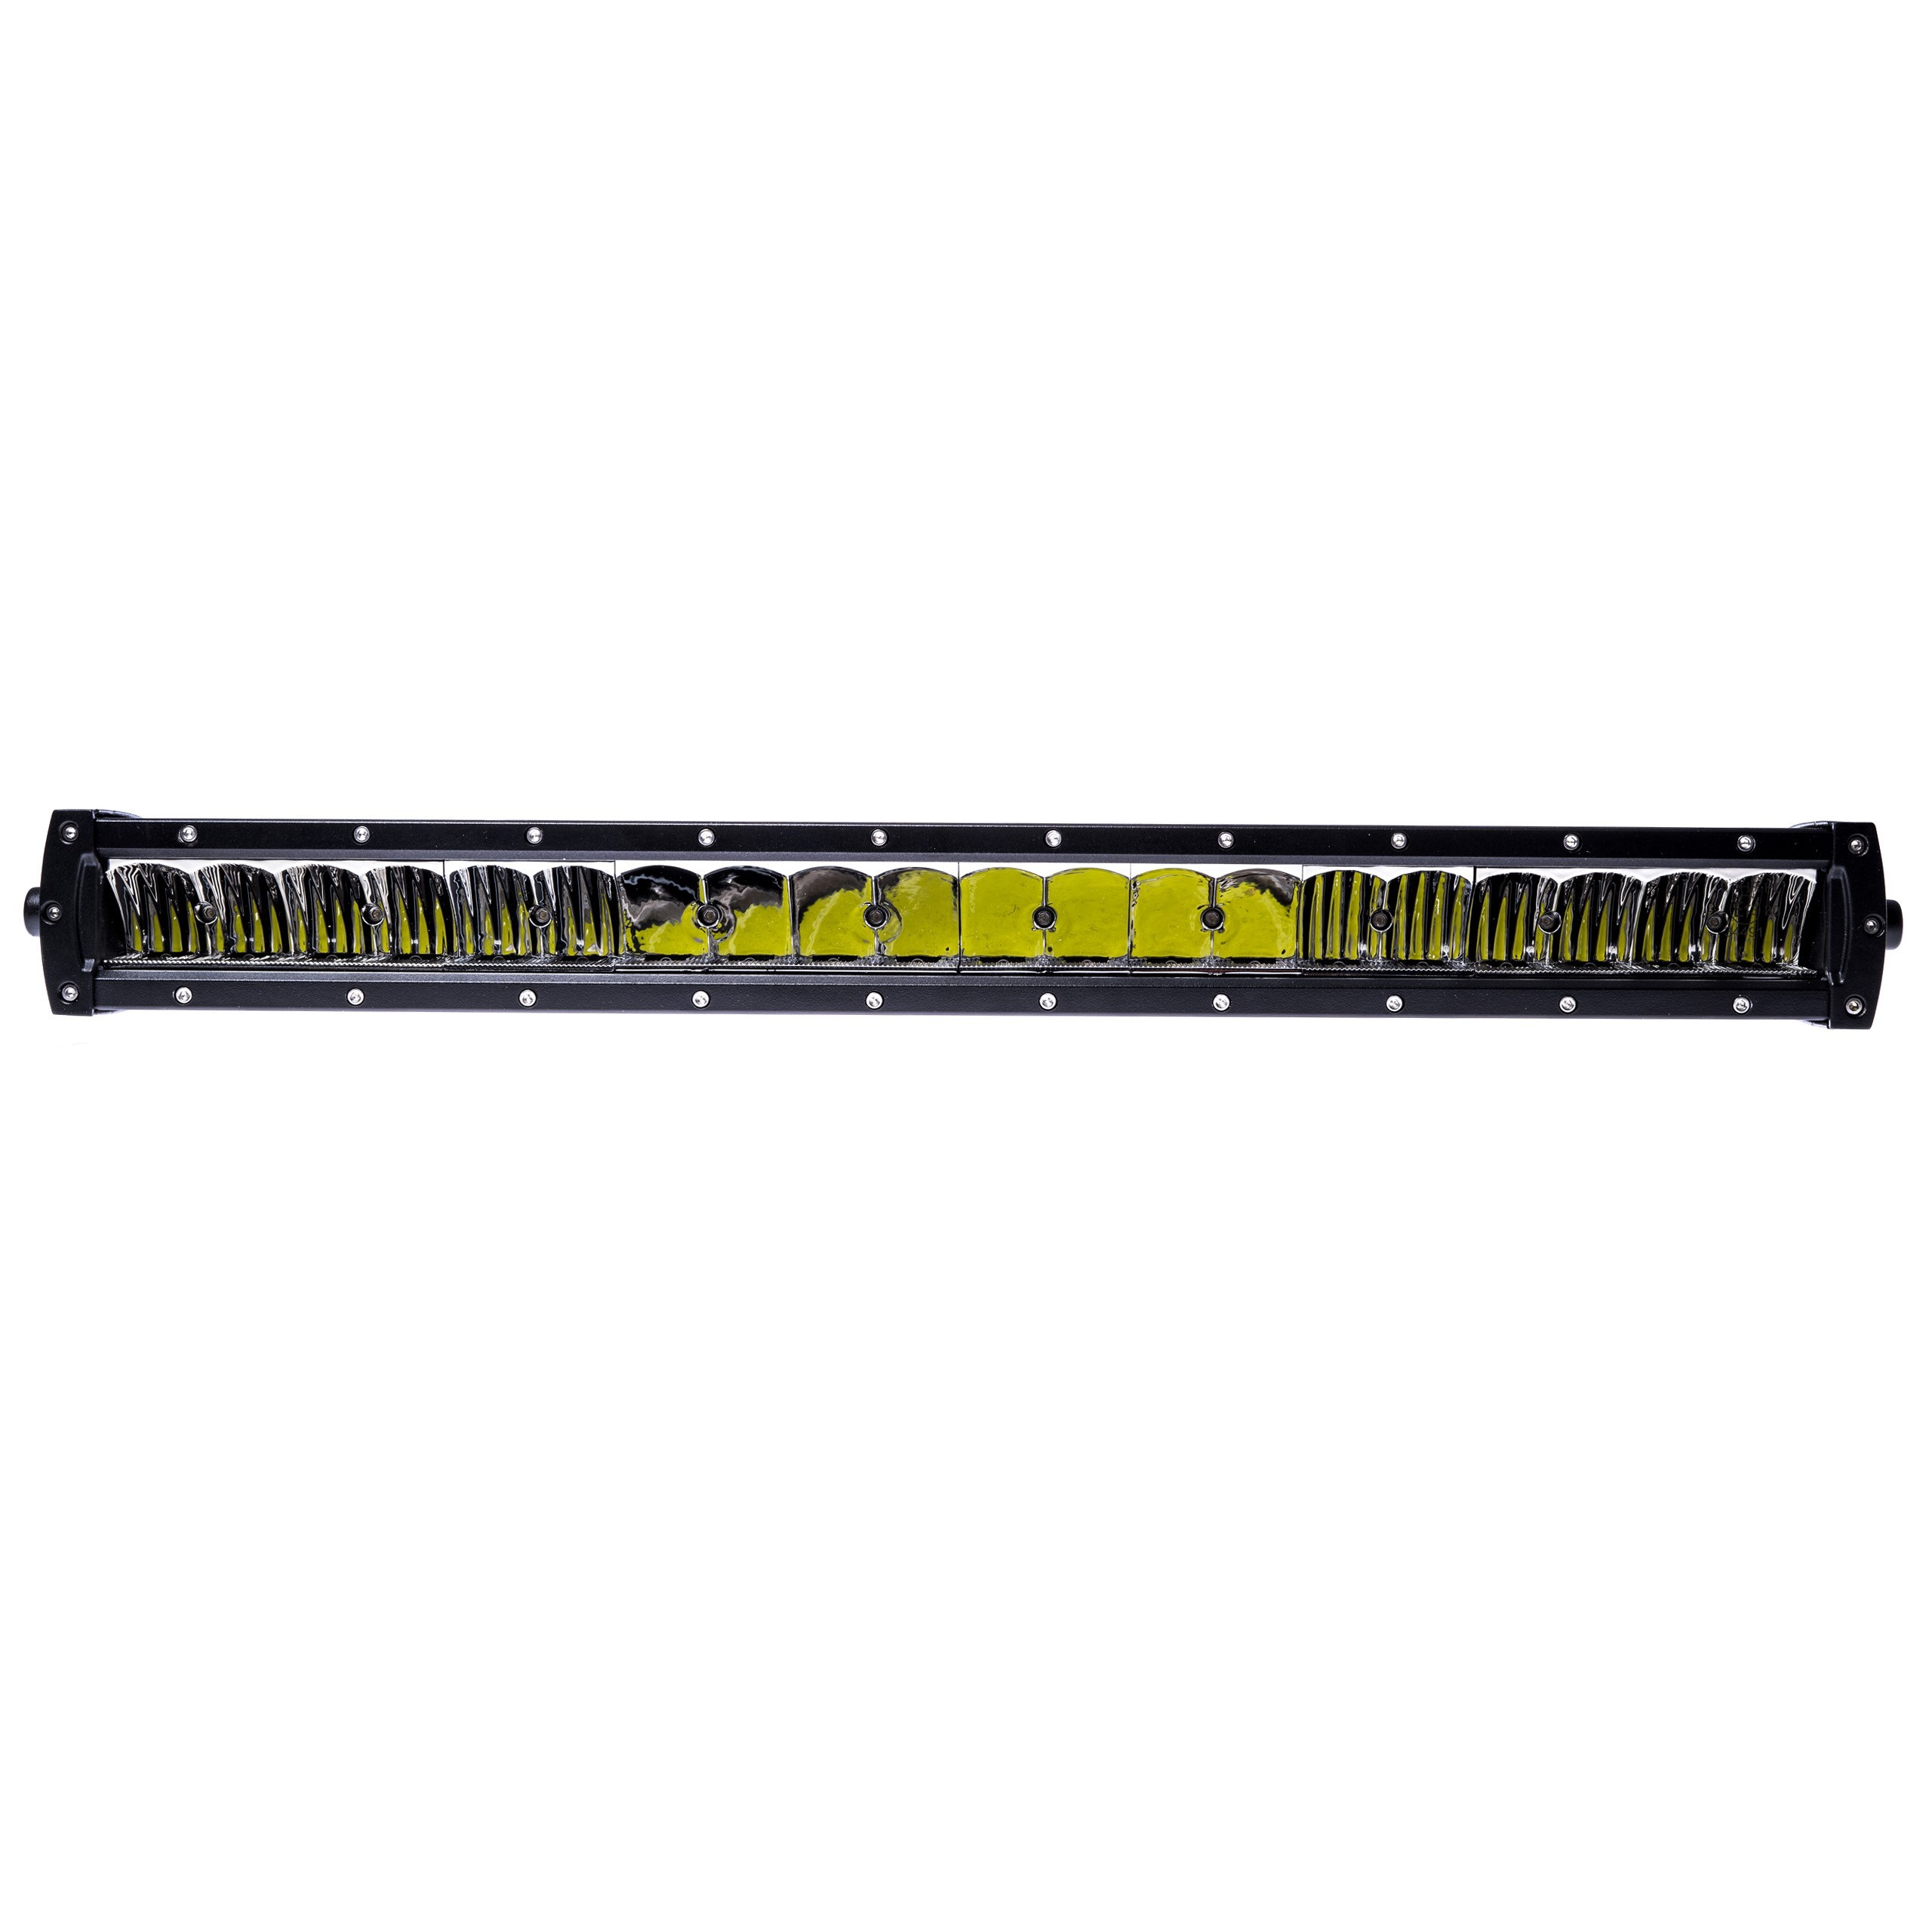 EPWLD01 LED DRIVING LIGHT 200W CREE COMBO WITH APPROVAL